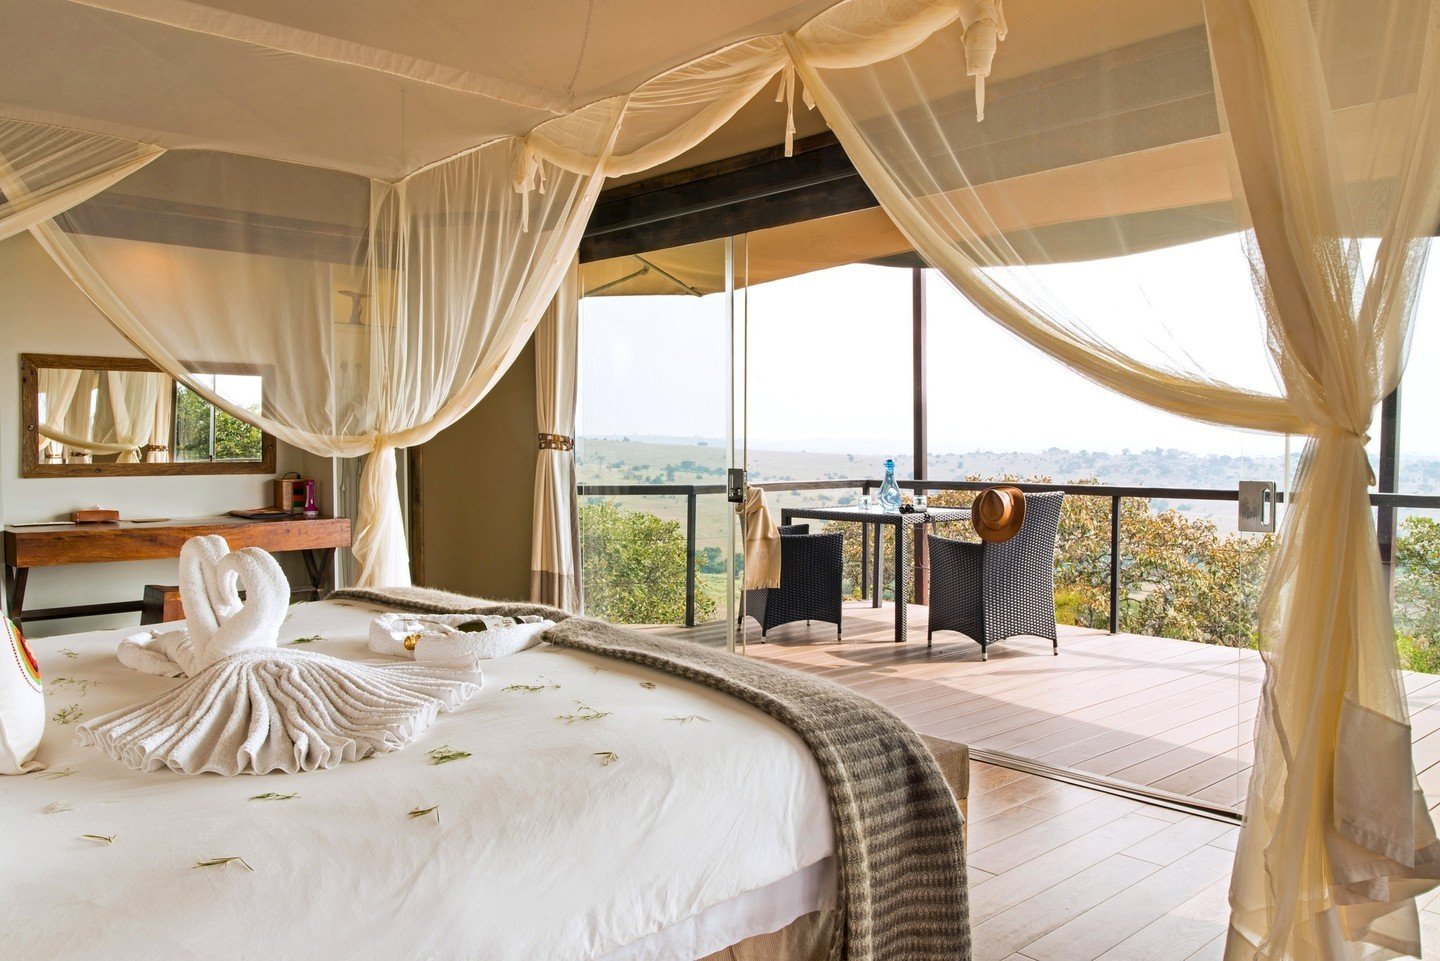 @lemalacampslodges Kuria Hills' airy suites feature floor-to-ceiling windows and contemporary design with African touches. (Link in bio)